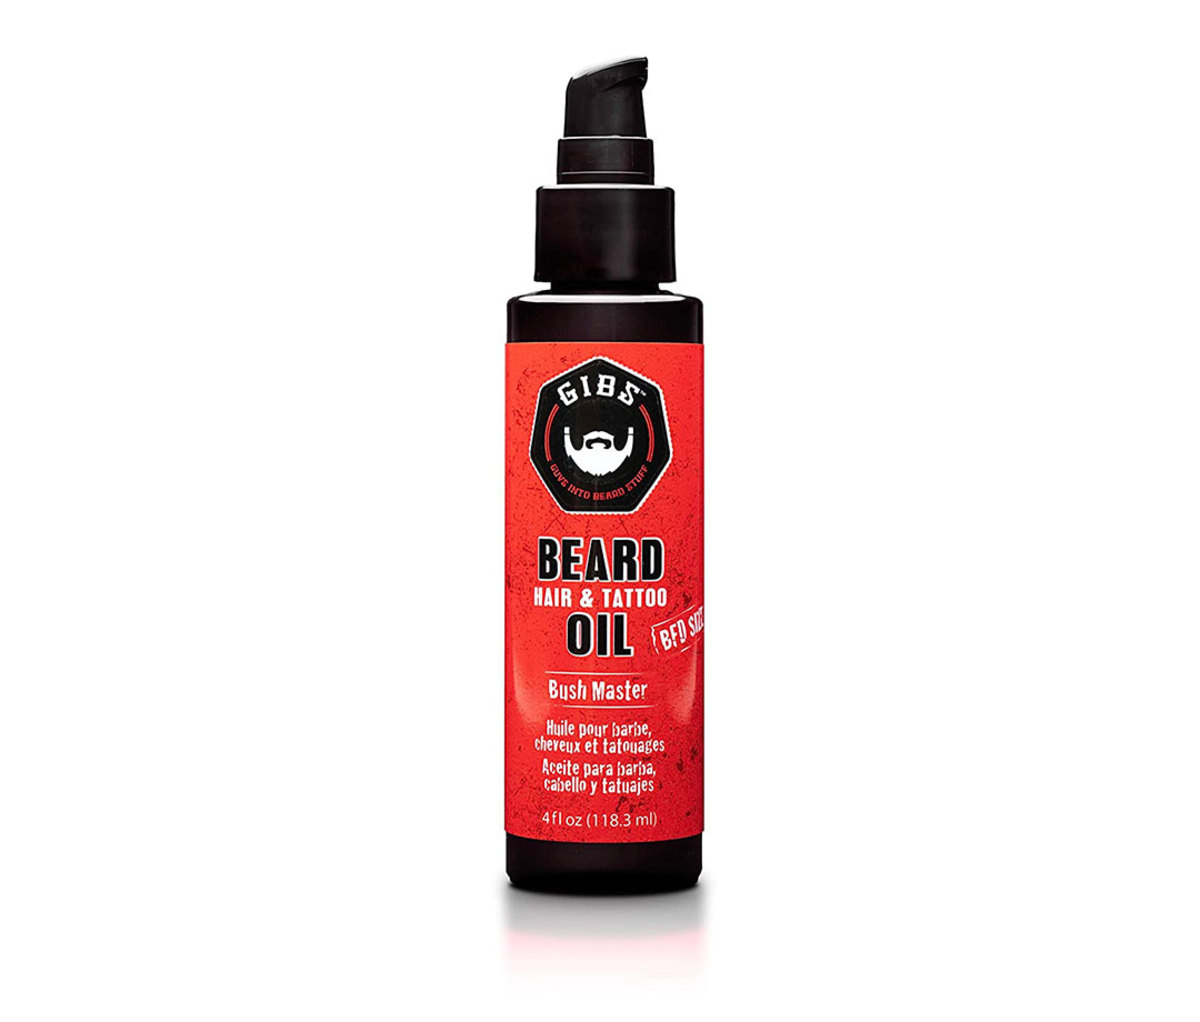 How bout a bit of the beard oil in me hair? Would it make it too